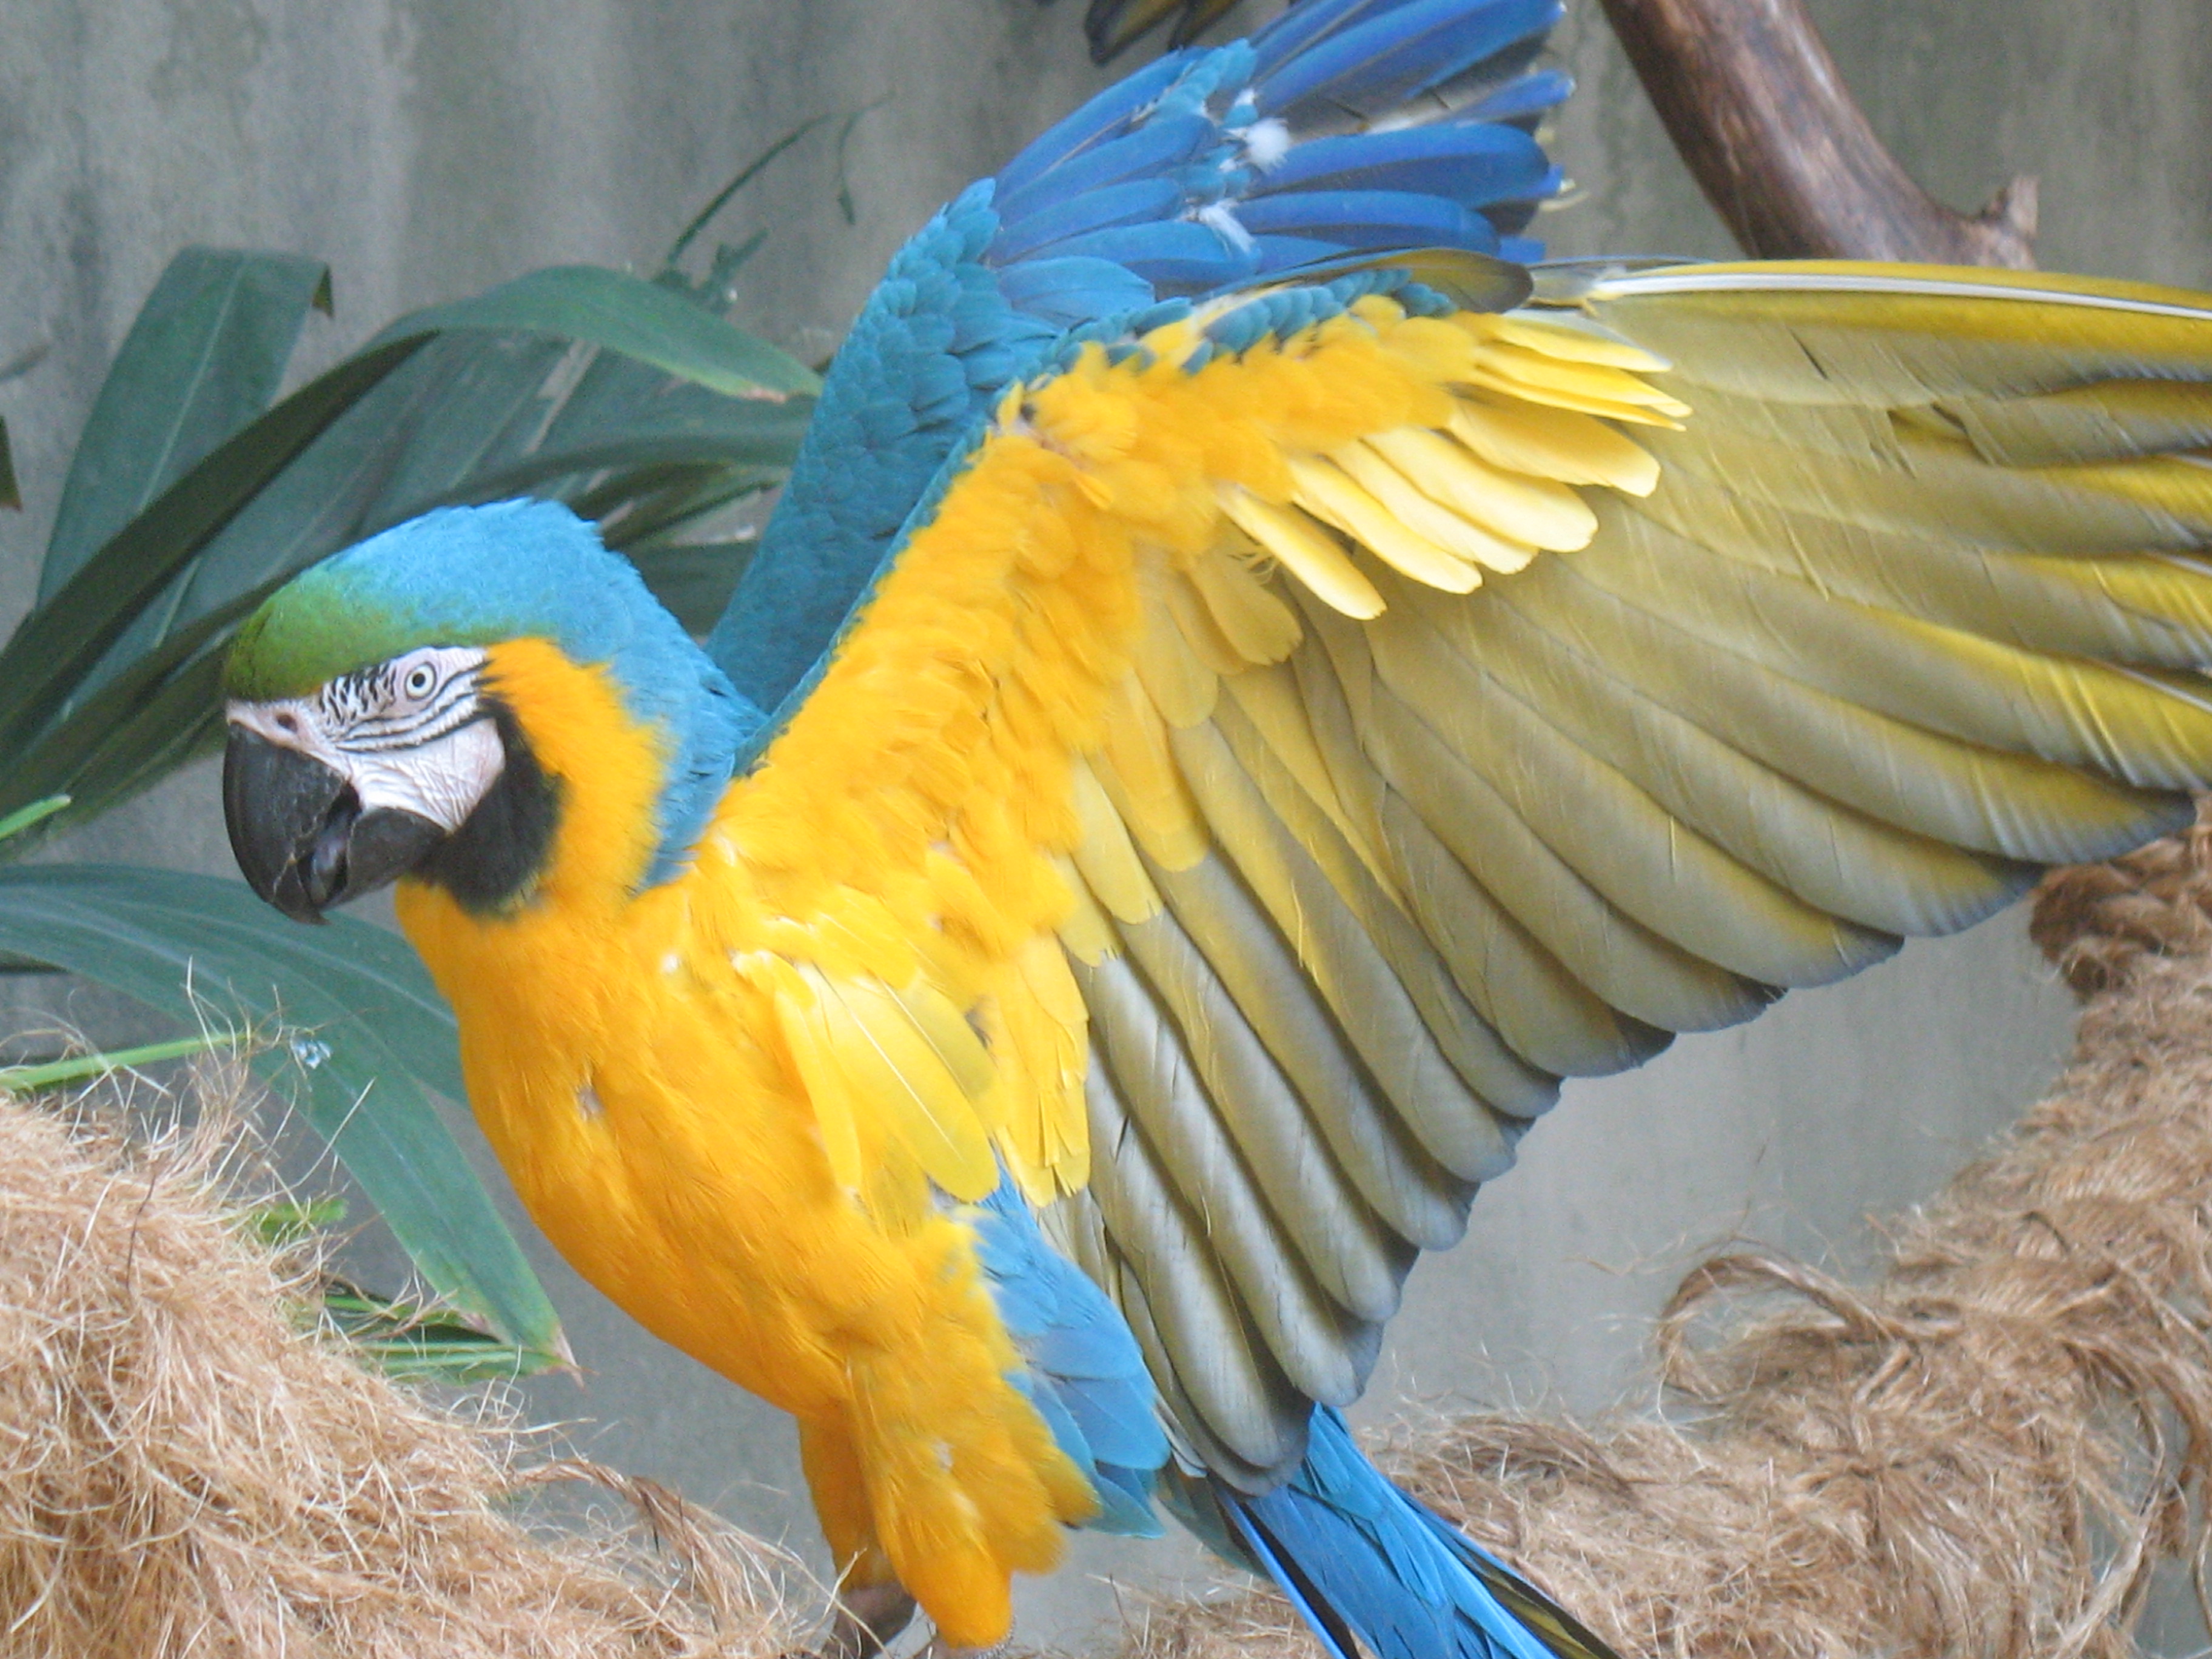 File:Blue-gold macaw wings outstretched.jpg - Wikipedia